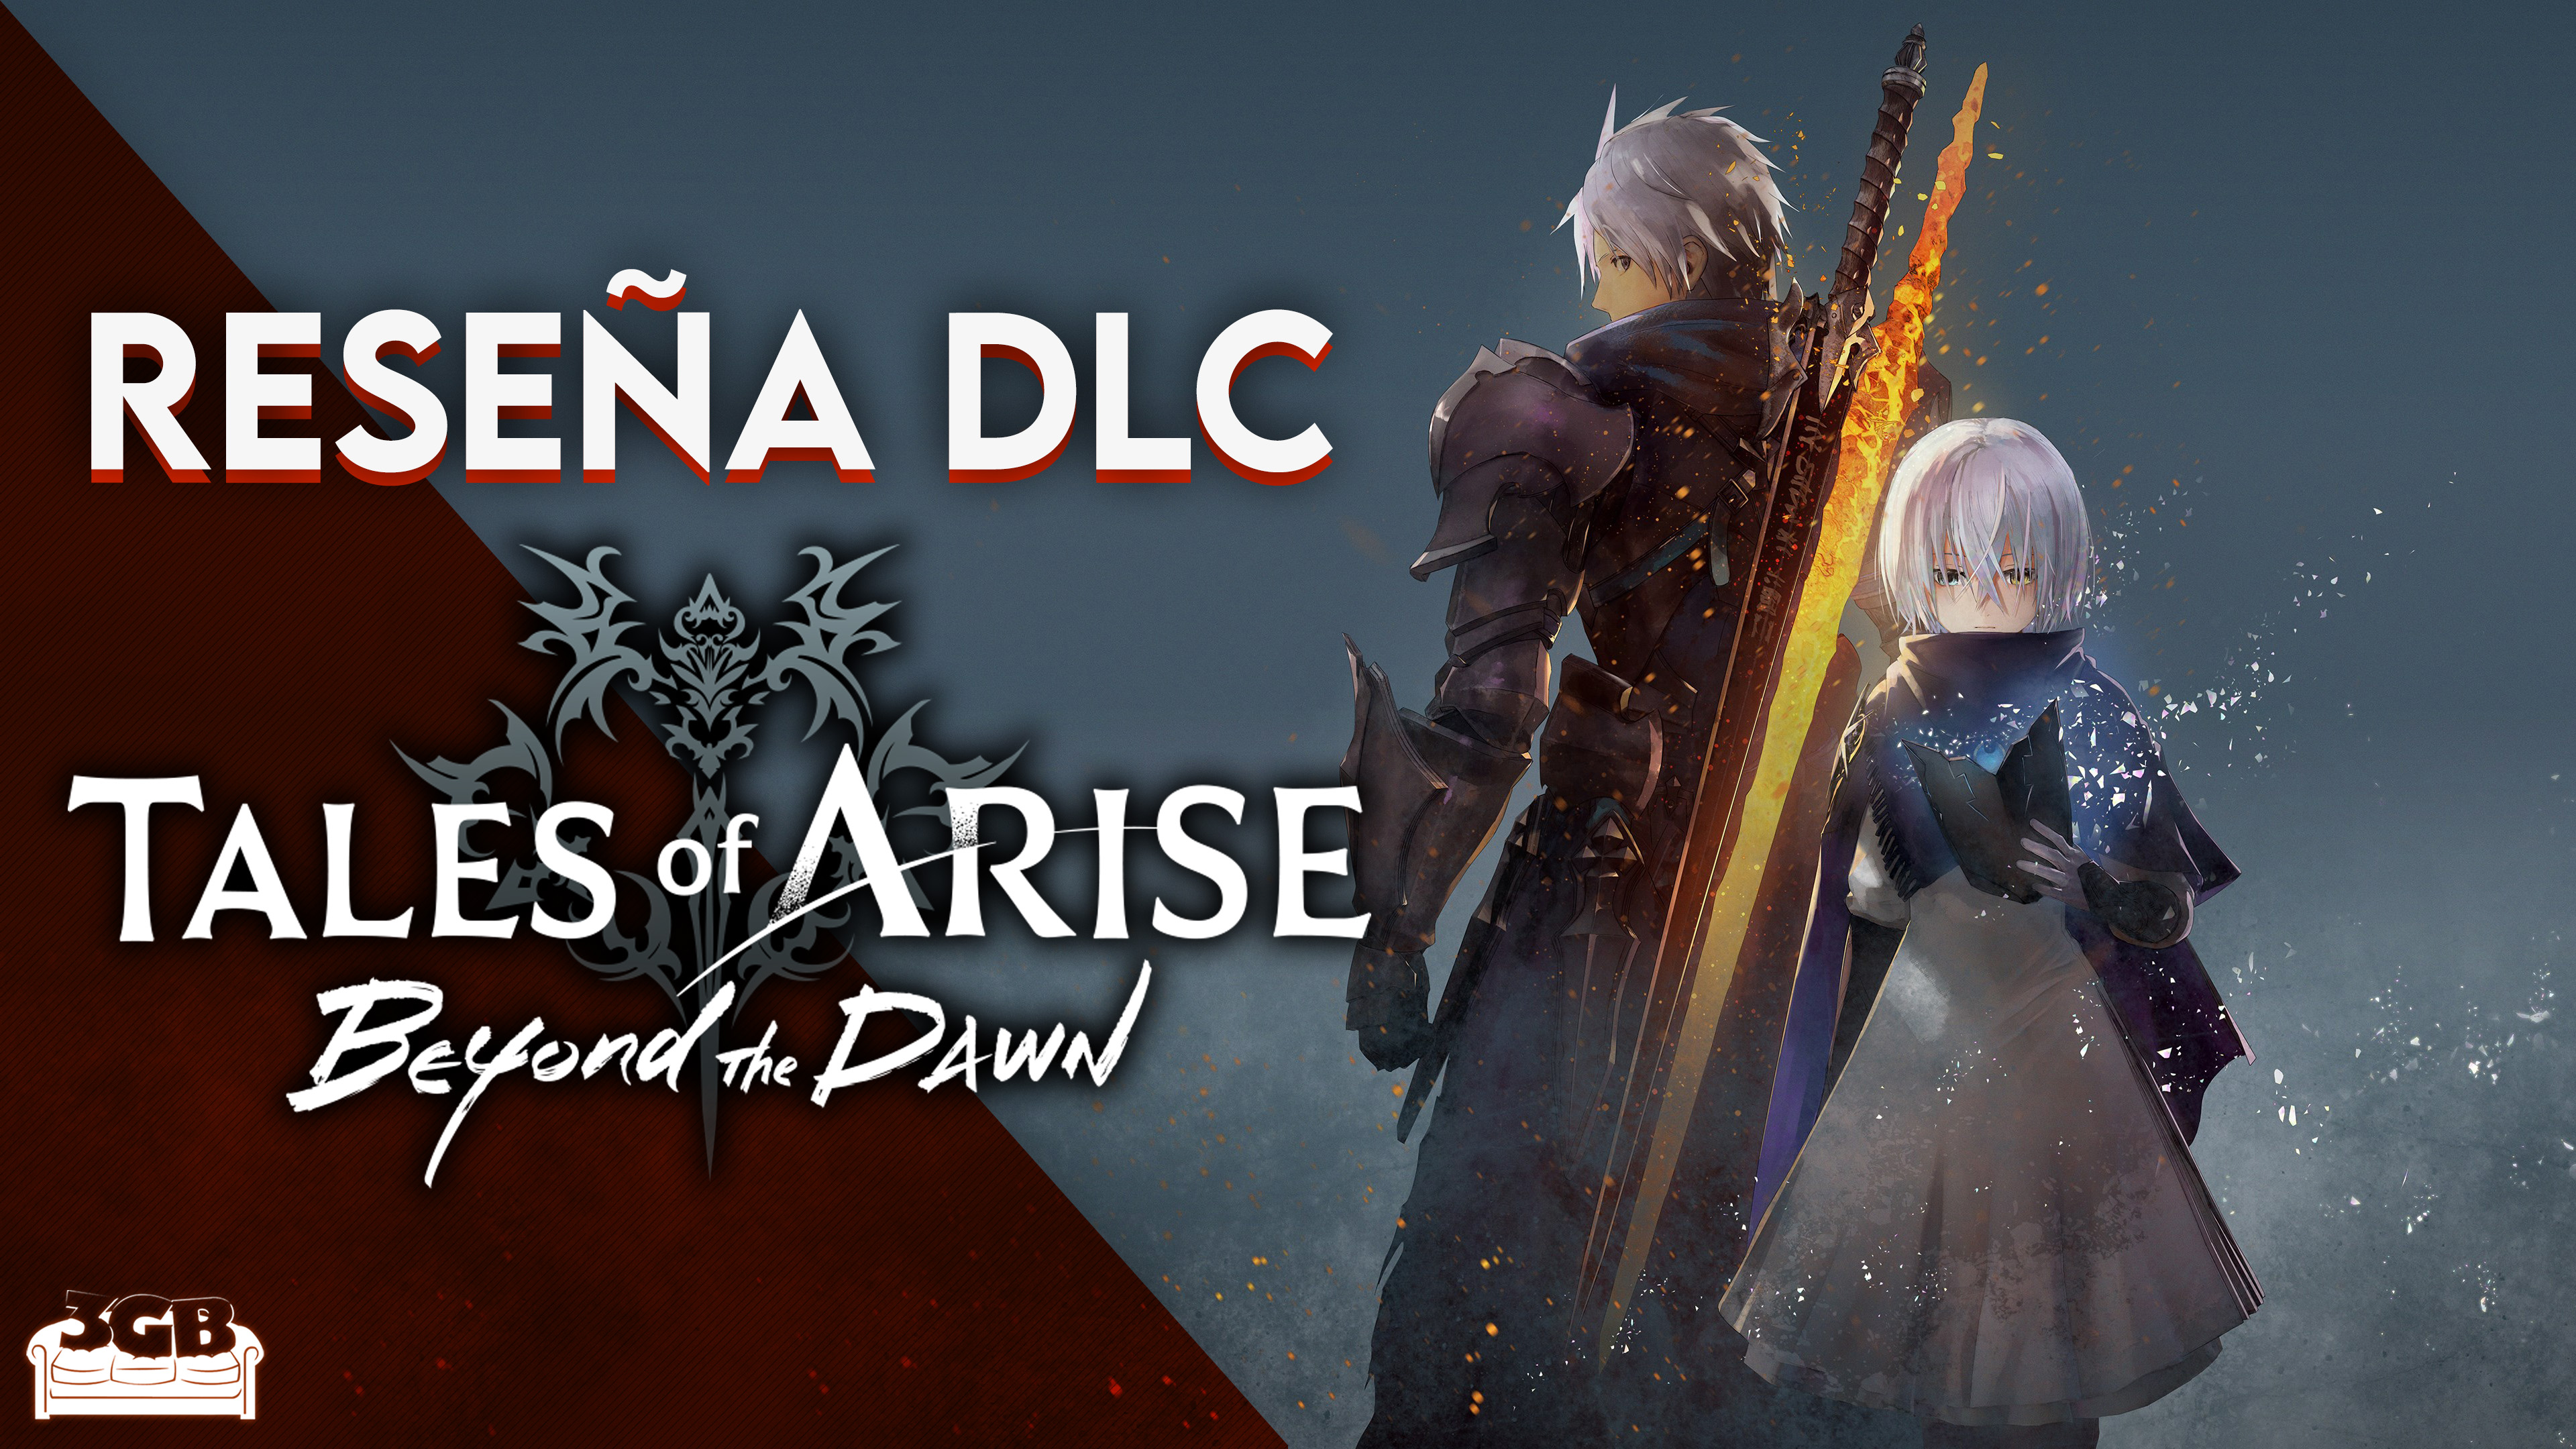 Reseña DLC Tales of Arise: Beyond The Dawn